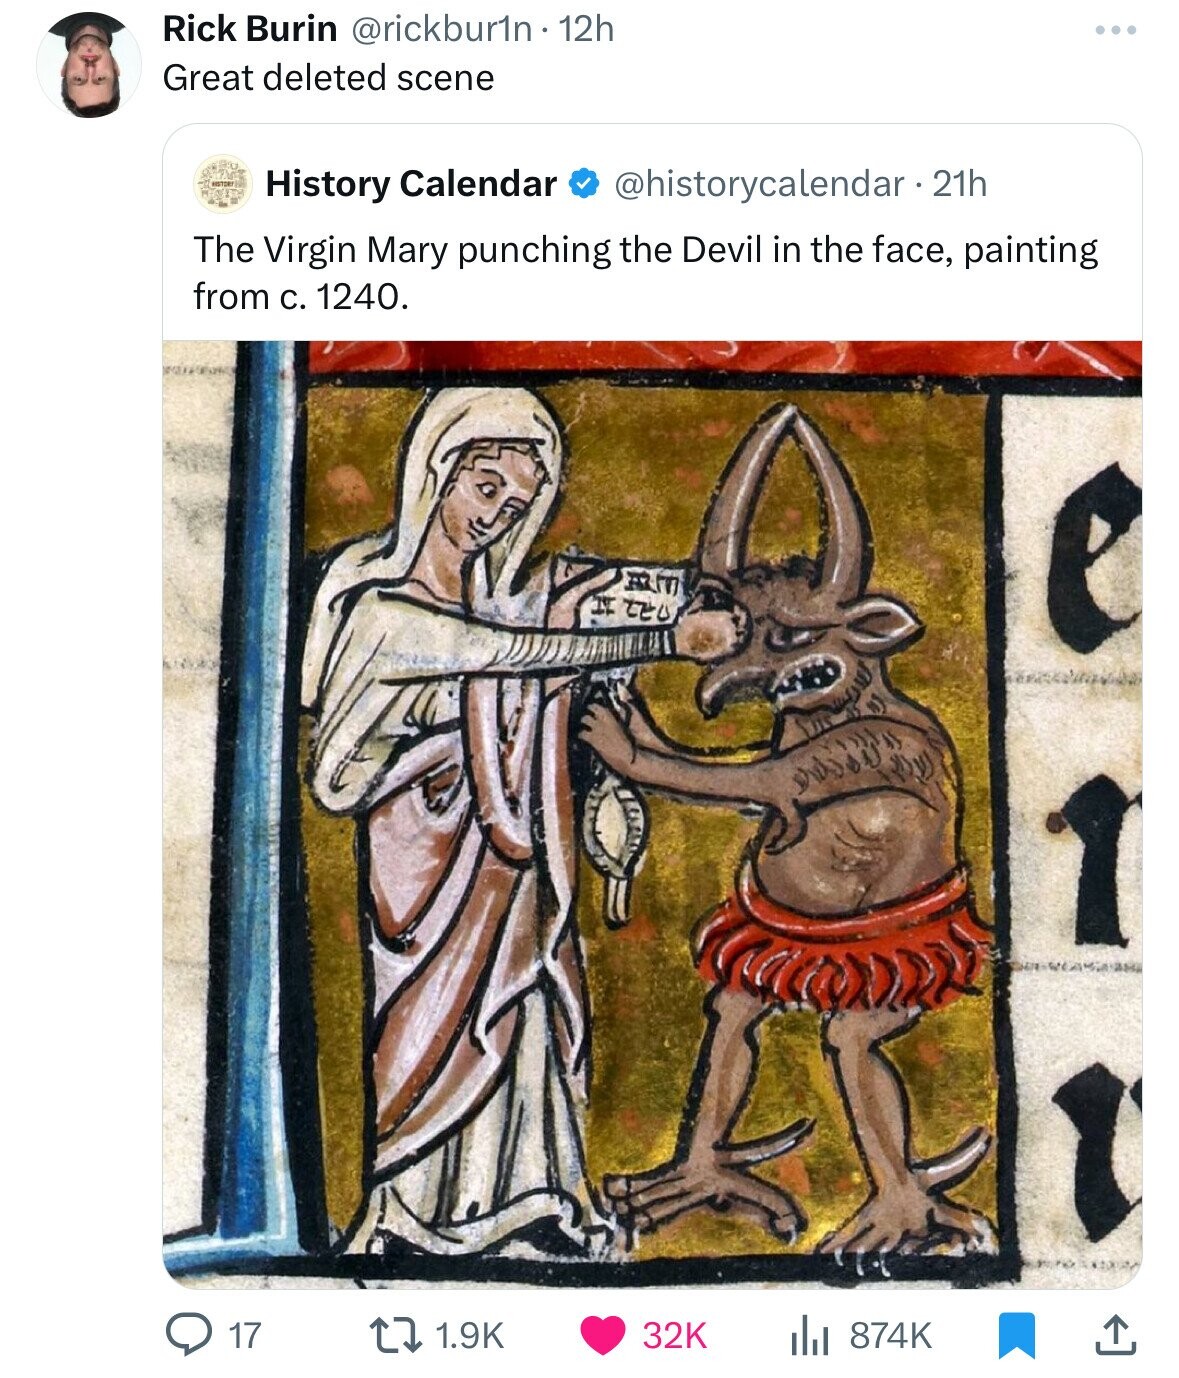 Rick Burin @rickbur1n 12h Great deleted scene @historycalendar - 2 21h History Calendar The Virgin Mary punching the Devil in the face, painting from с. 1240. AM IV TEU 17 1.9K 32K 874K 